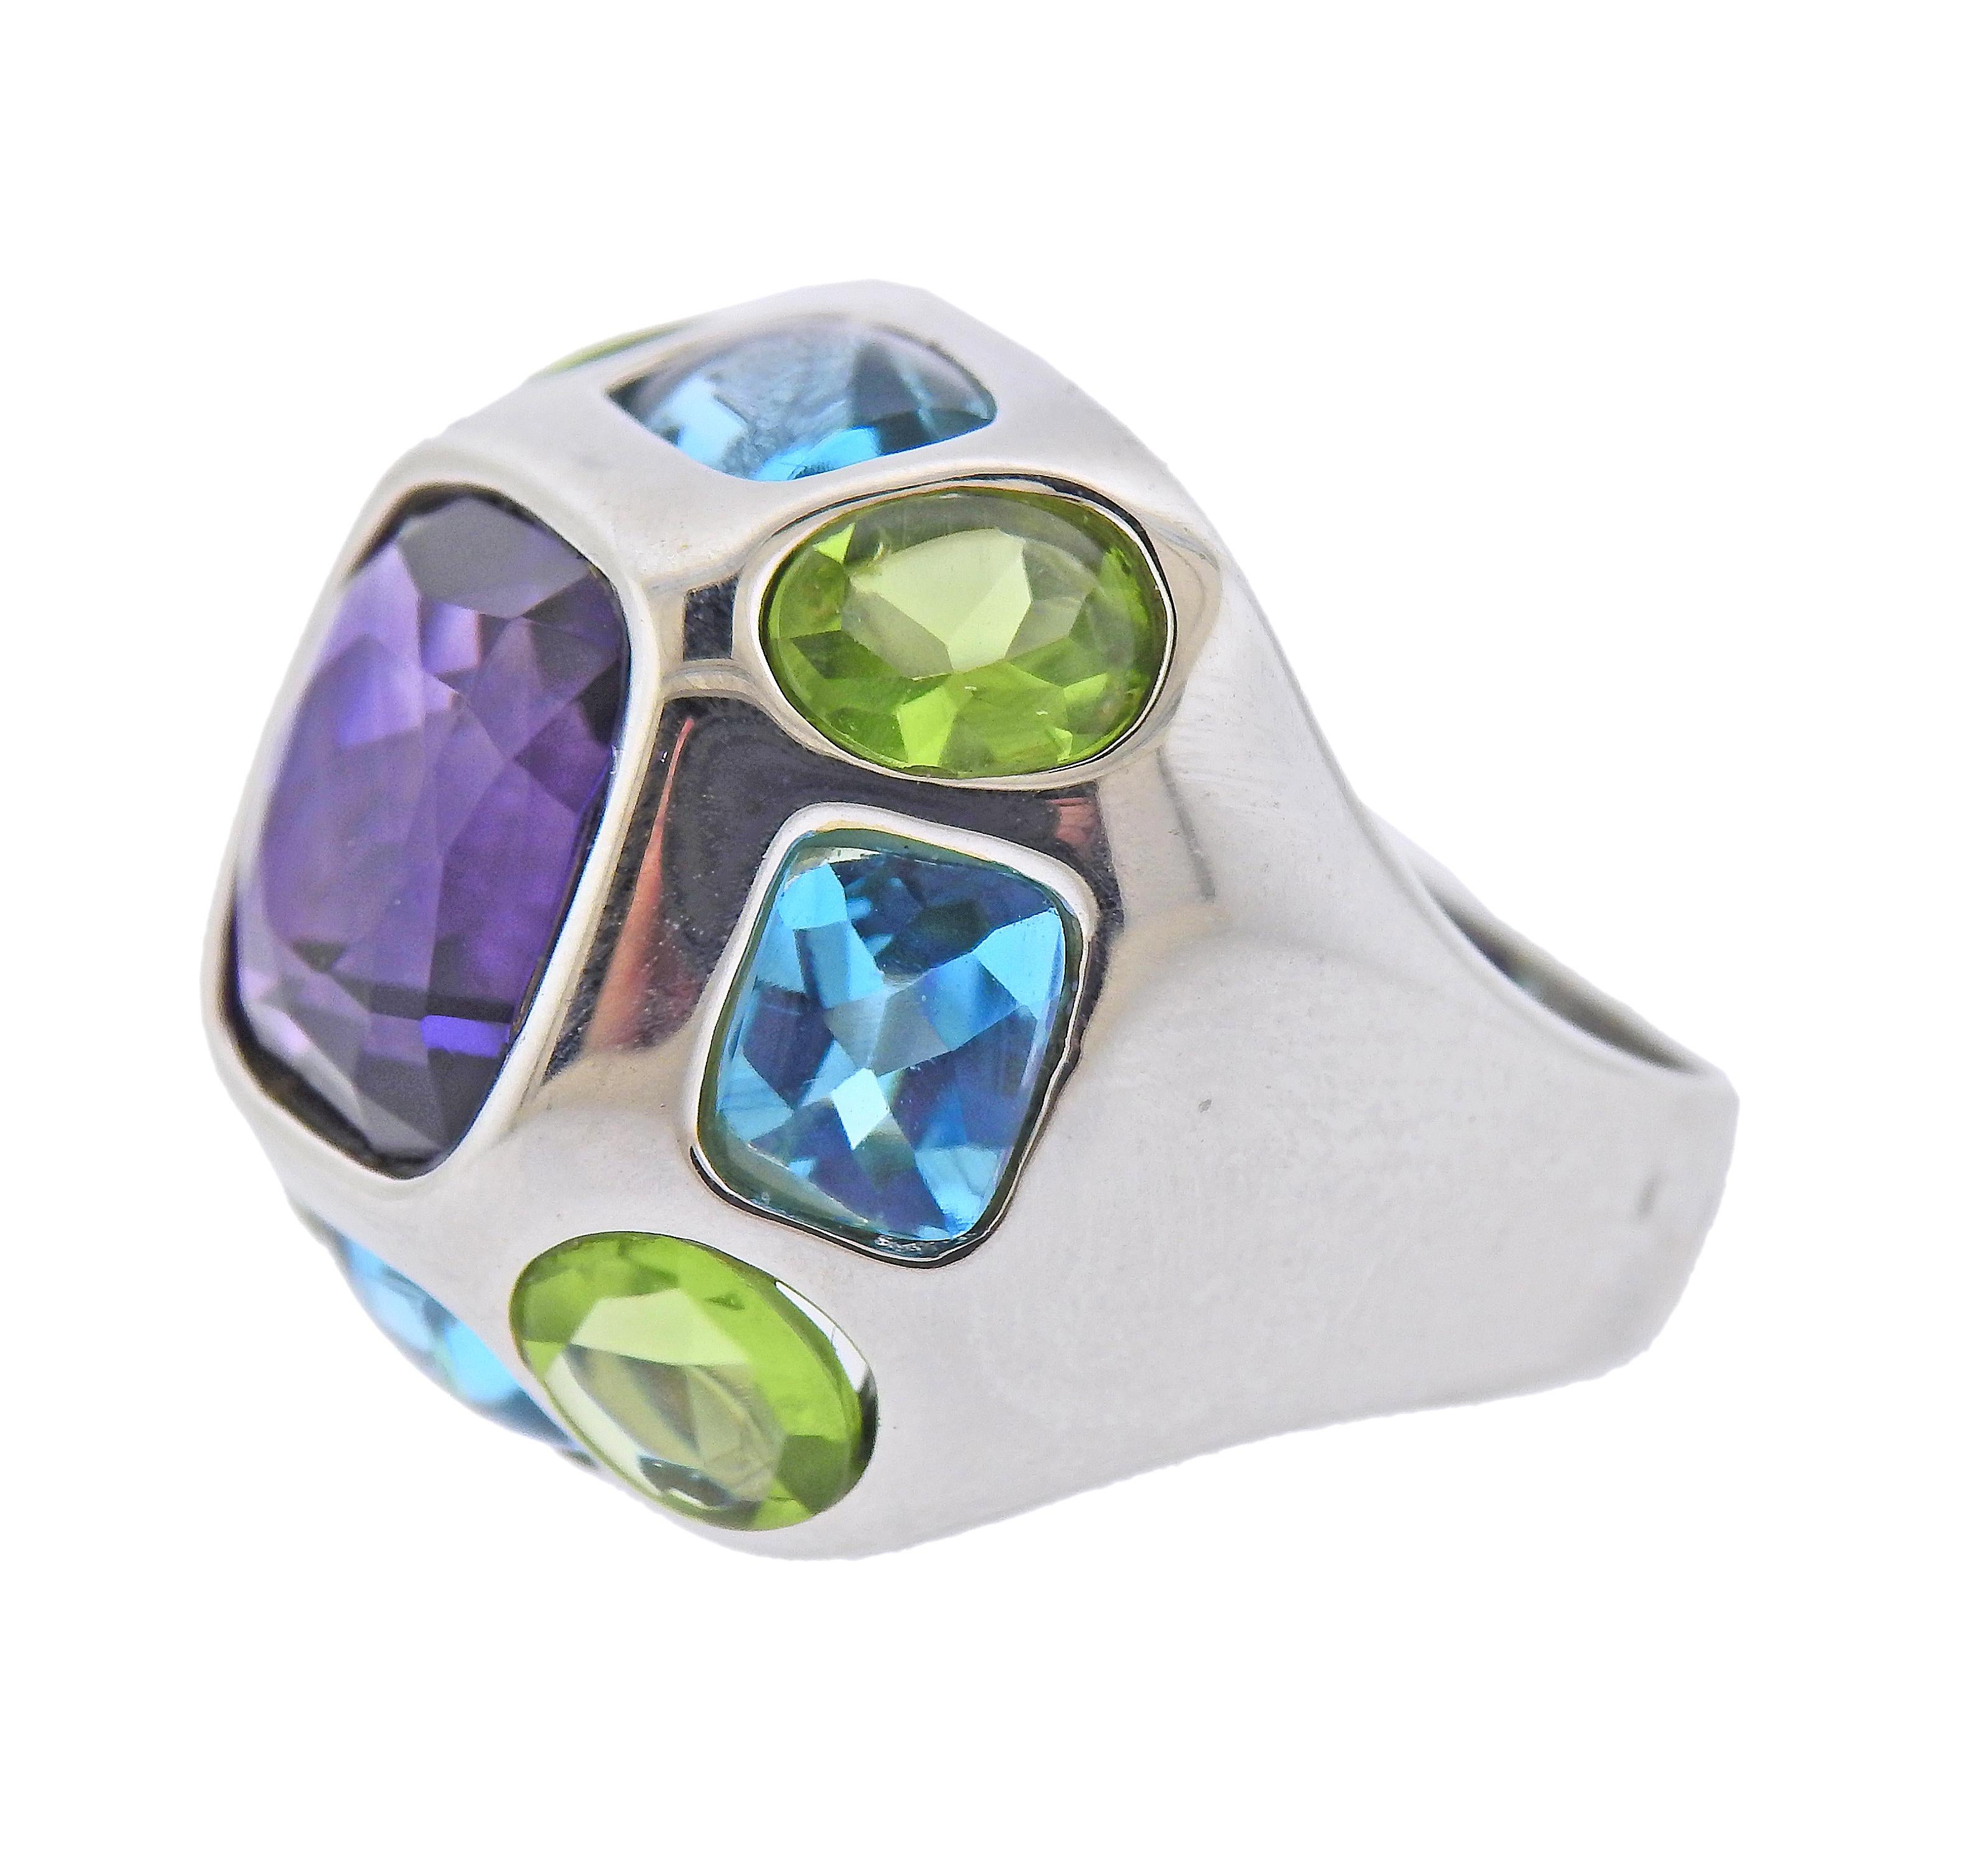 Made in the manner of Chanel Coco baroque style, classic  18k white gold ring , set with amethyst, blue topaz and peridot. Ring size - 6, ring top - 21mm x 21mm. Marked: K18WG. Weight - 18.1 grams. 